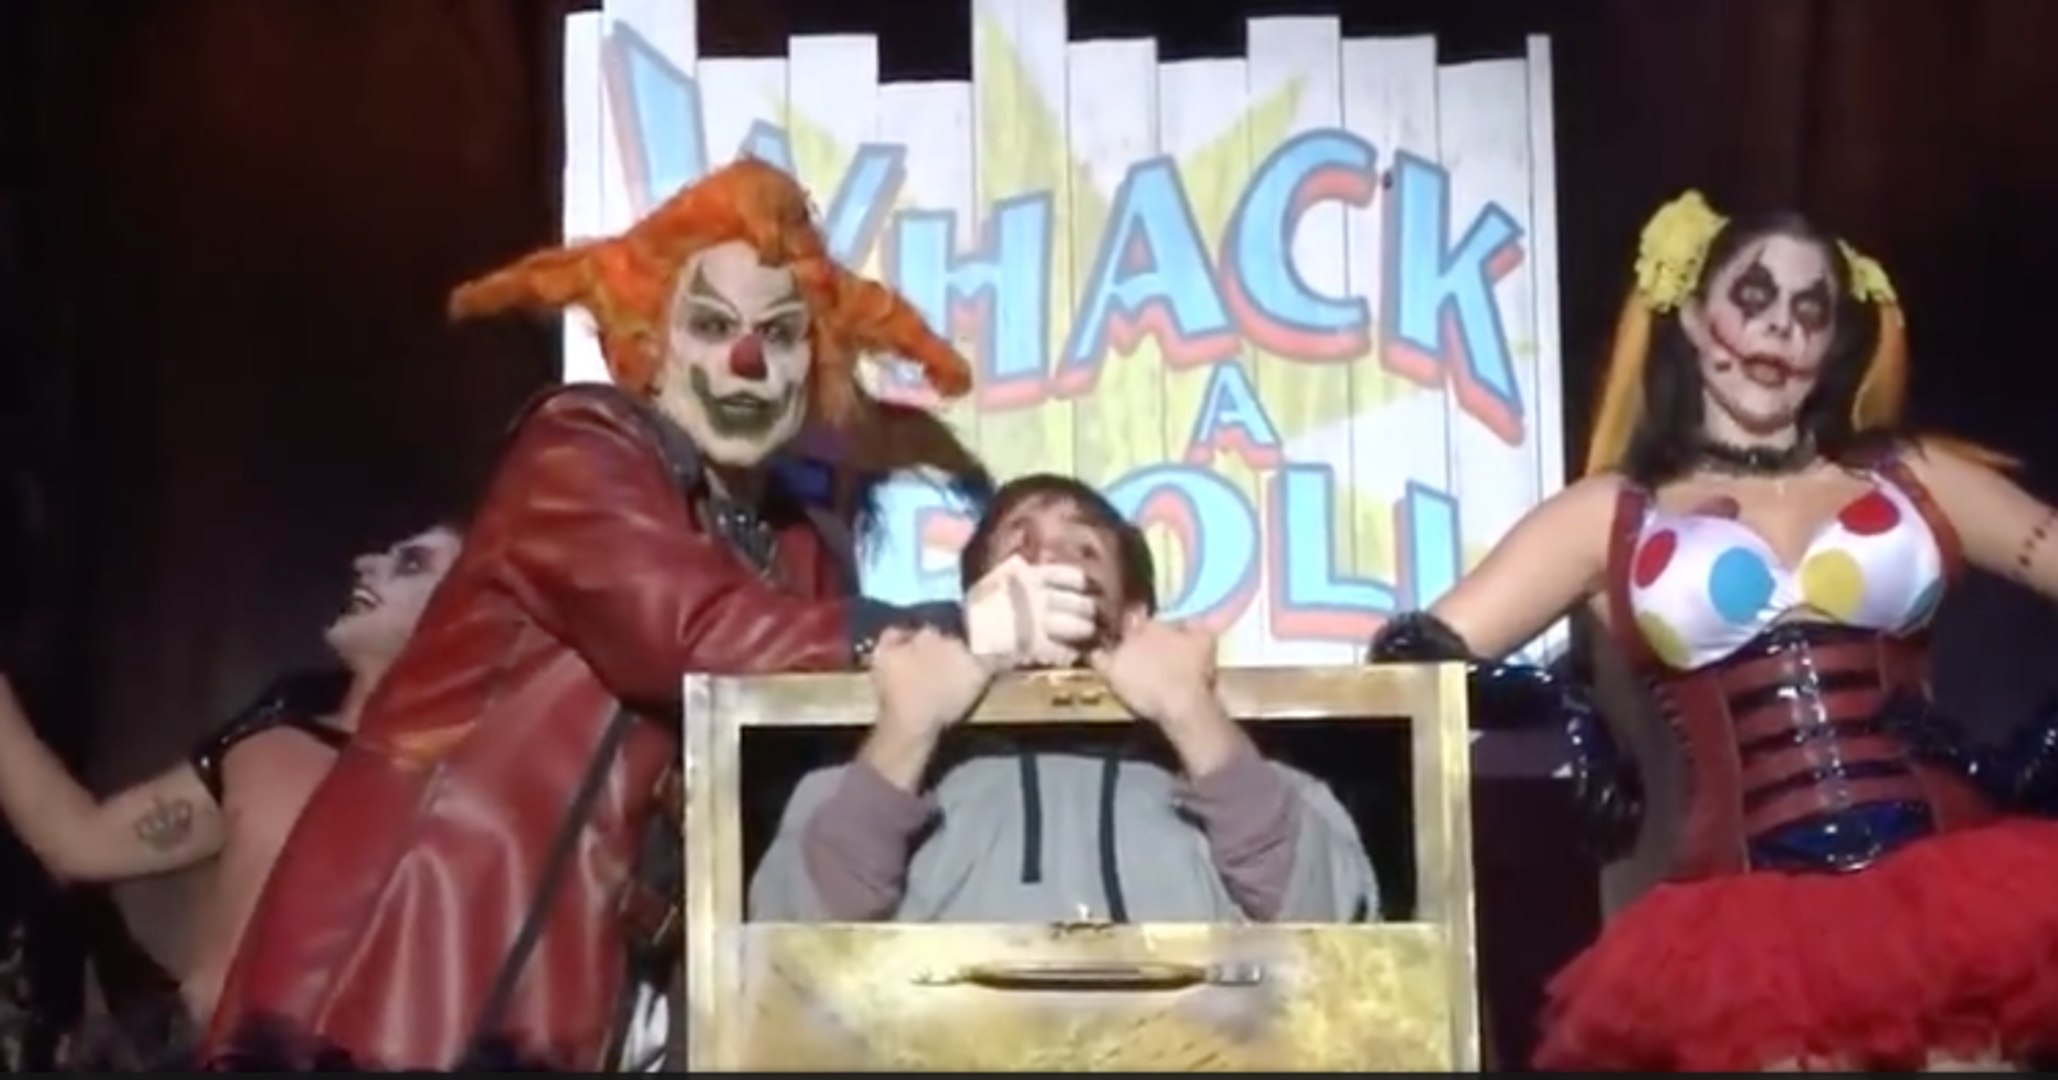 Halloween Horror Nights Jack The Clown - The Carnage Returns 2015 Full Show  - video Dailymotion